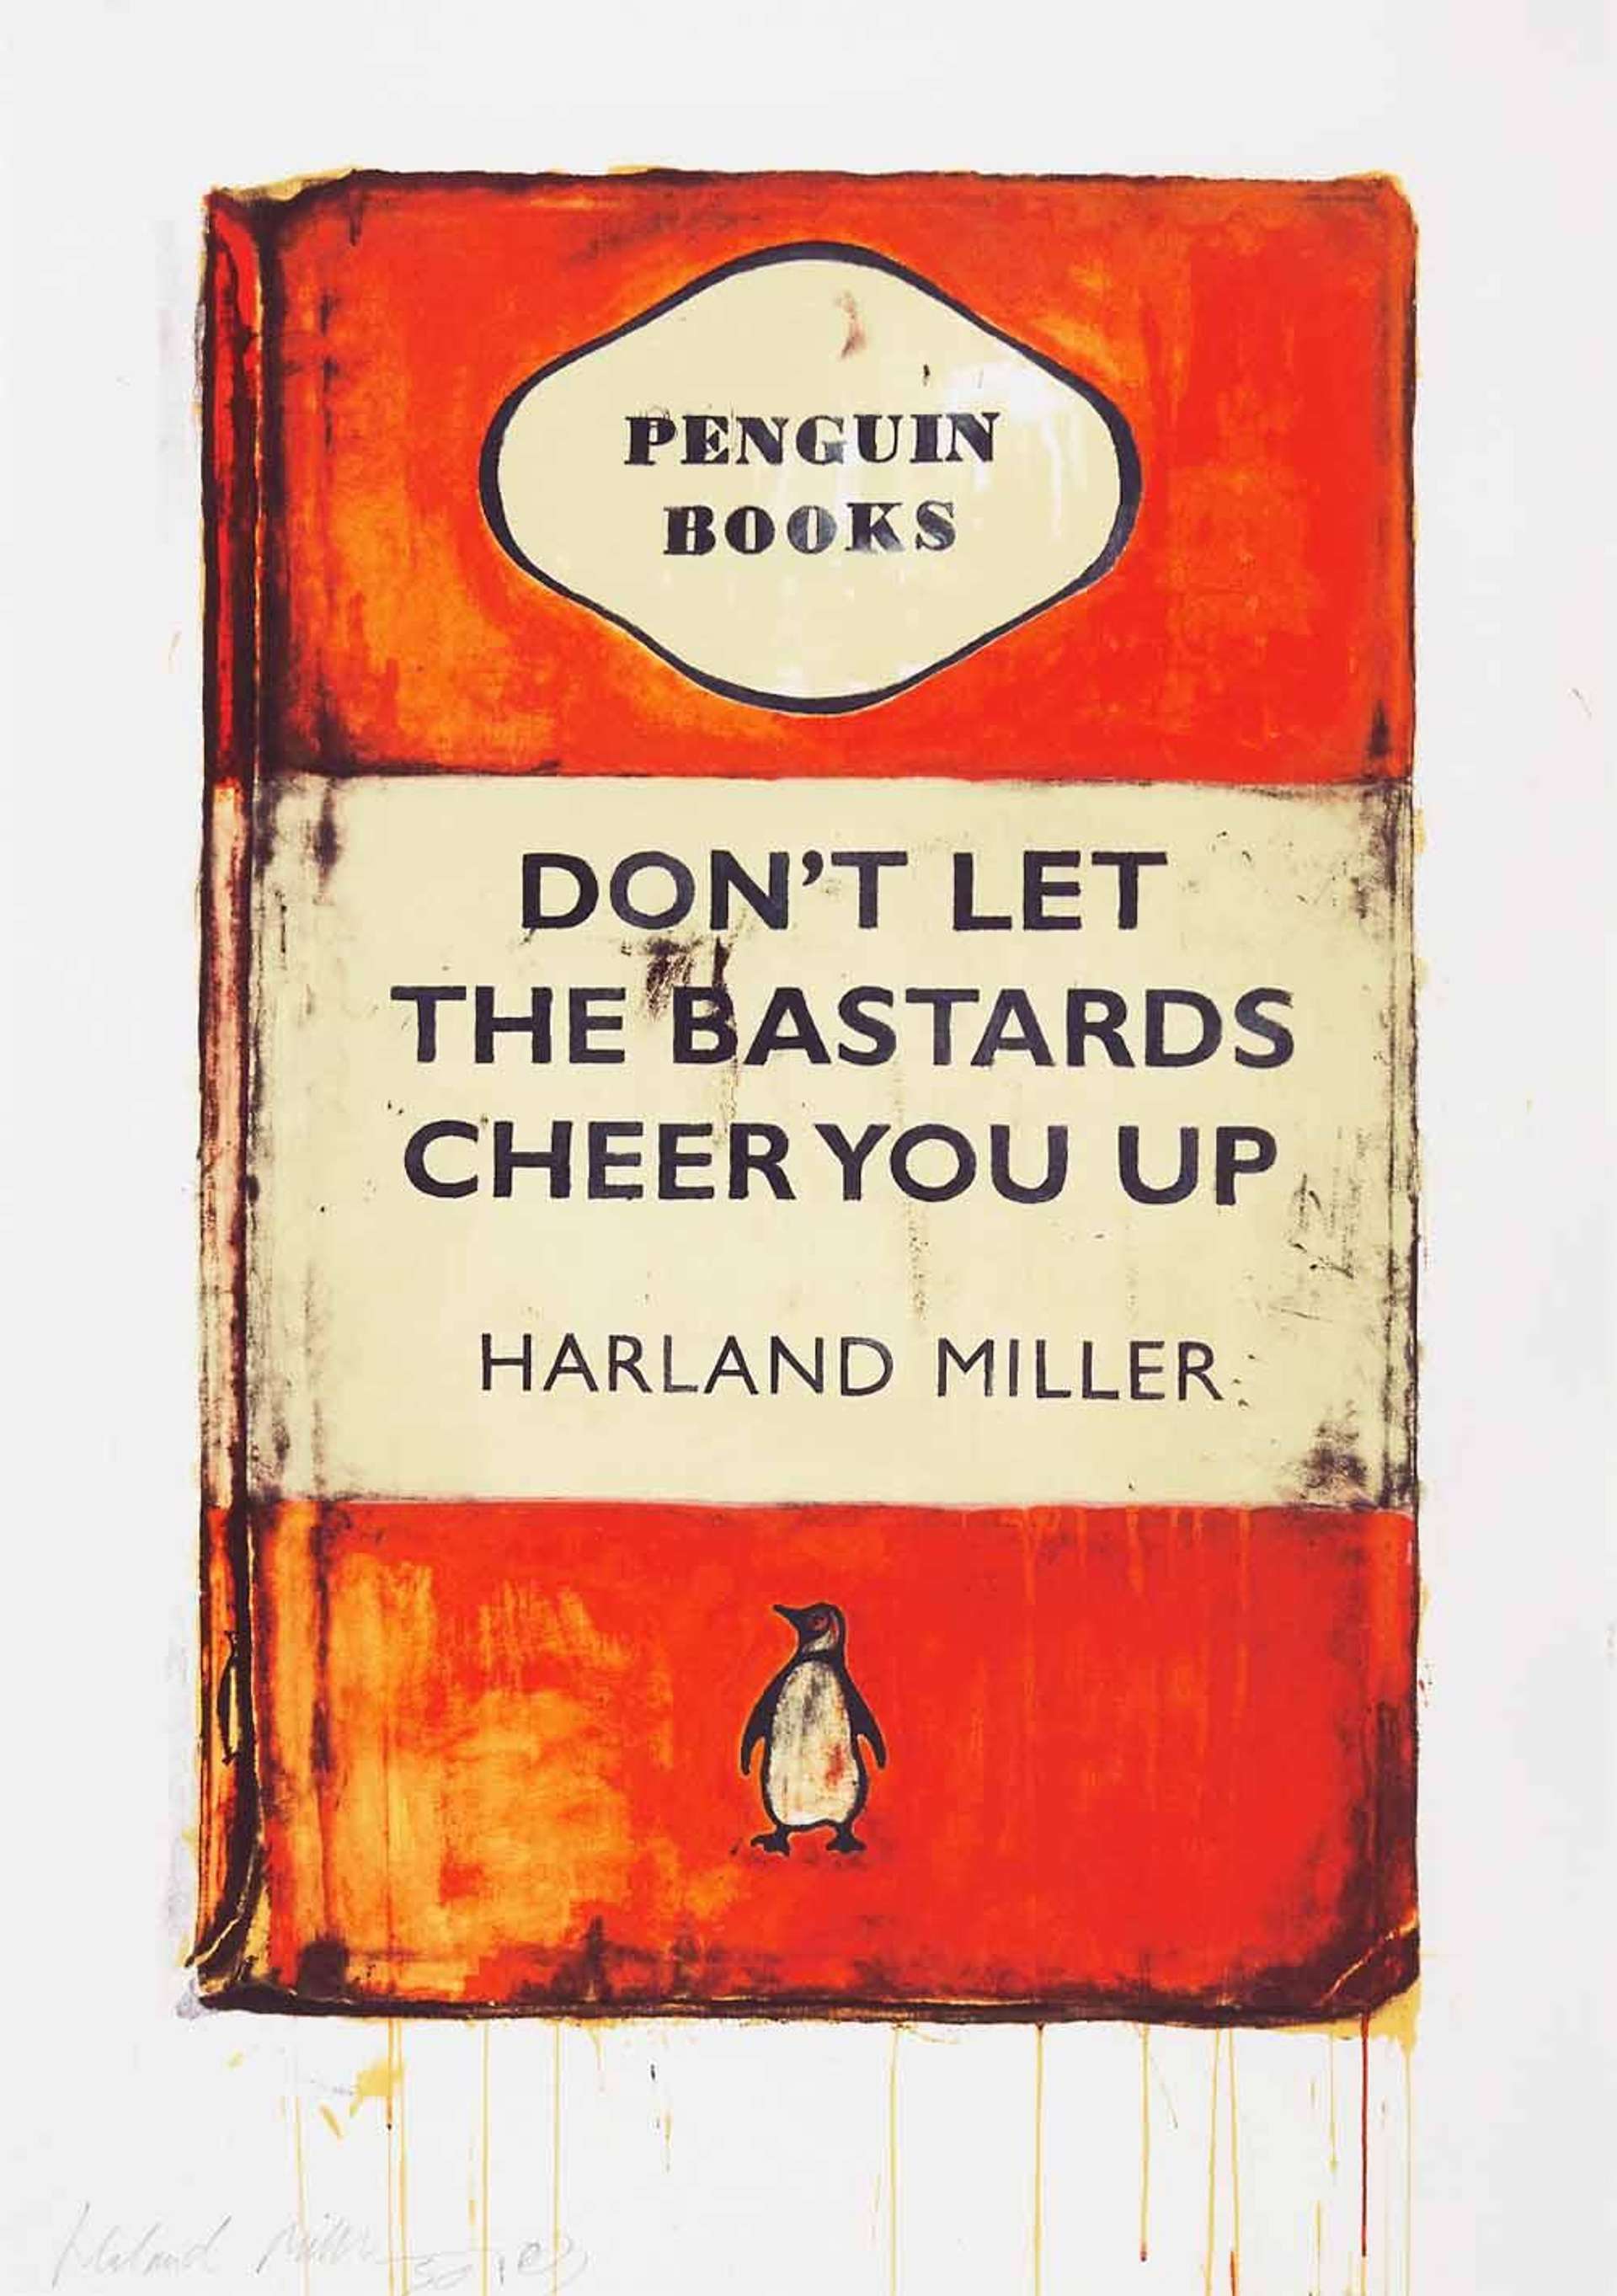 Don’t Let The Bastards Cheer You Up belongs to one of Harland Miller’s most recognised series of works inspired by the Penguin book covers.In keeping with his usual wittiness, the text emblazoned across the forefront of this work of art is a play on the old adage “don’t let the bastards get you down”.